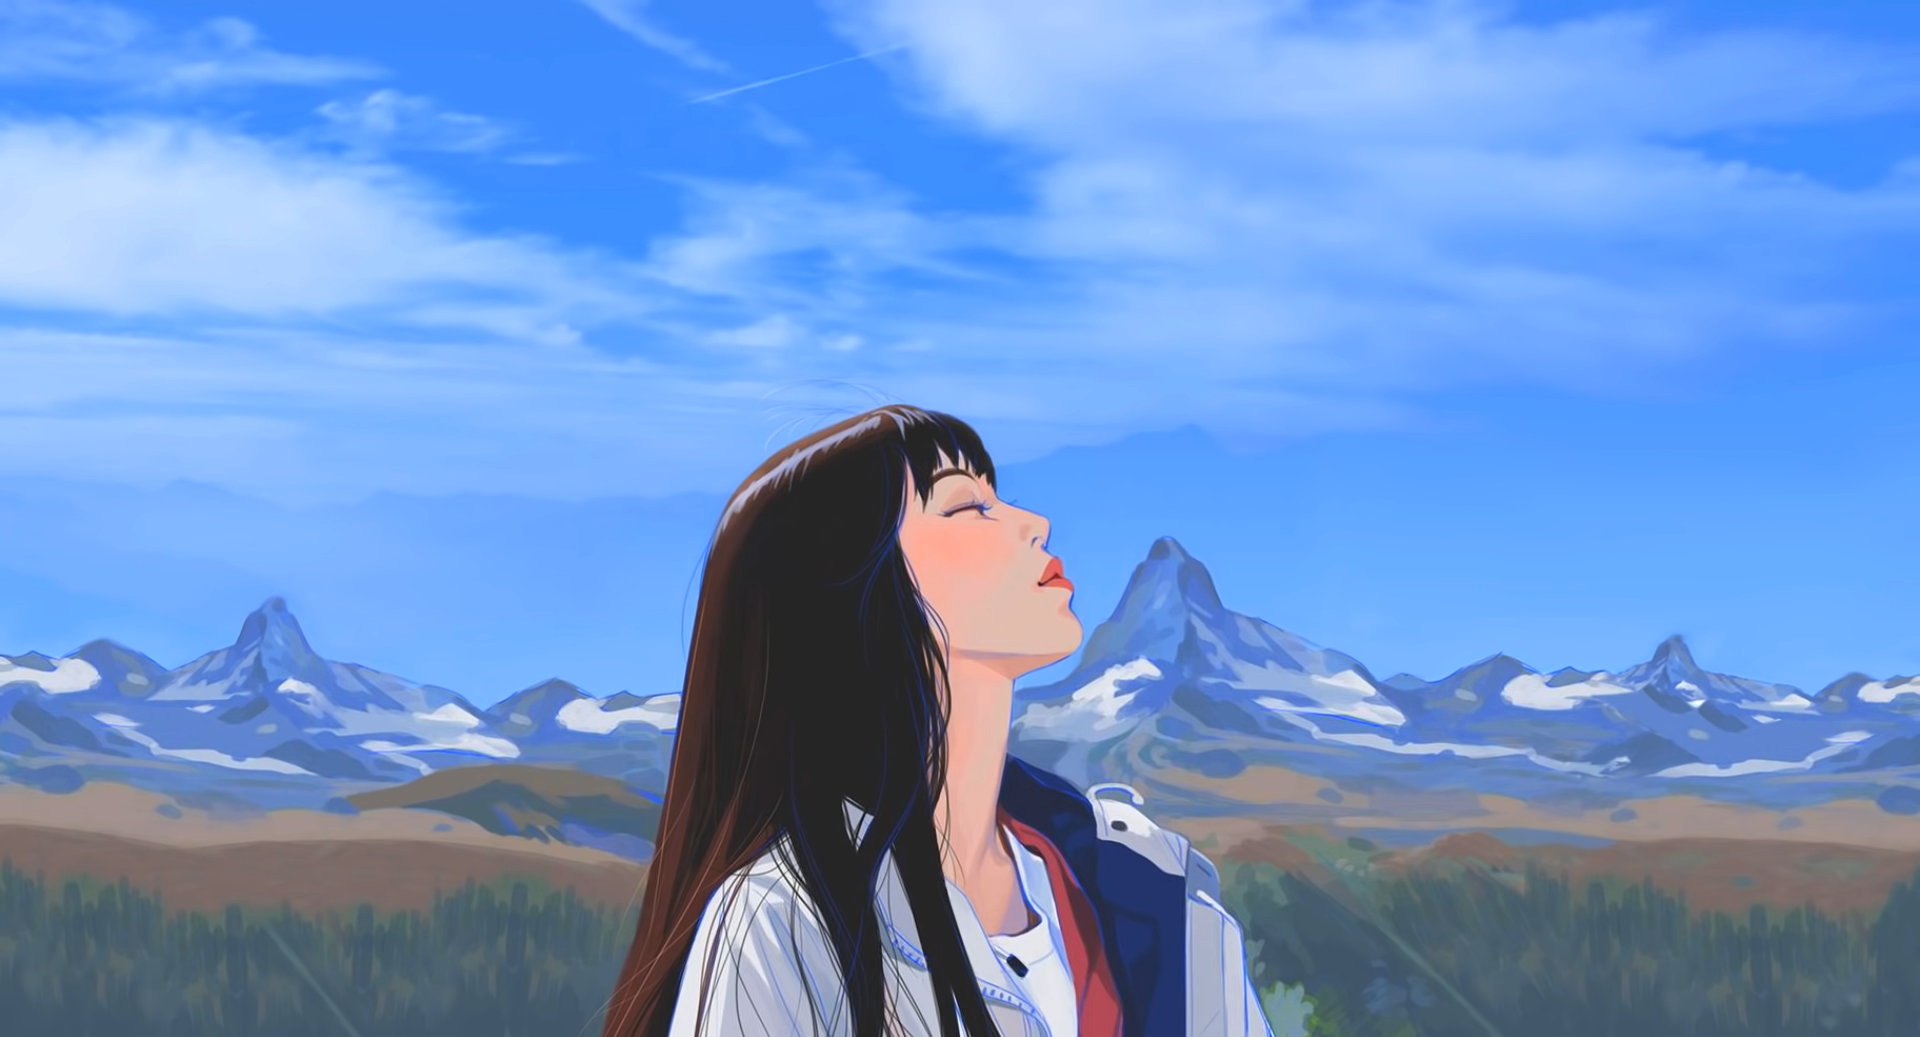 General 1920x1037 summer drawing closed eyes outdoors mountain view digital art